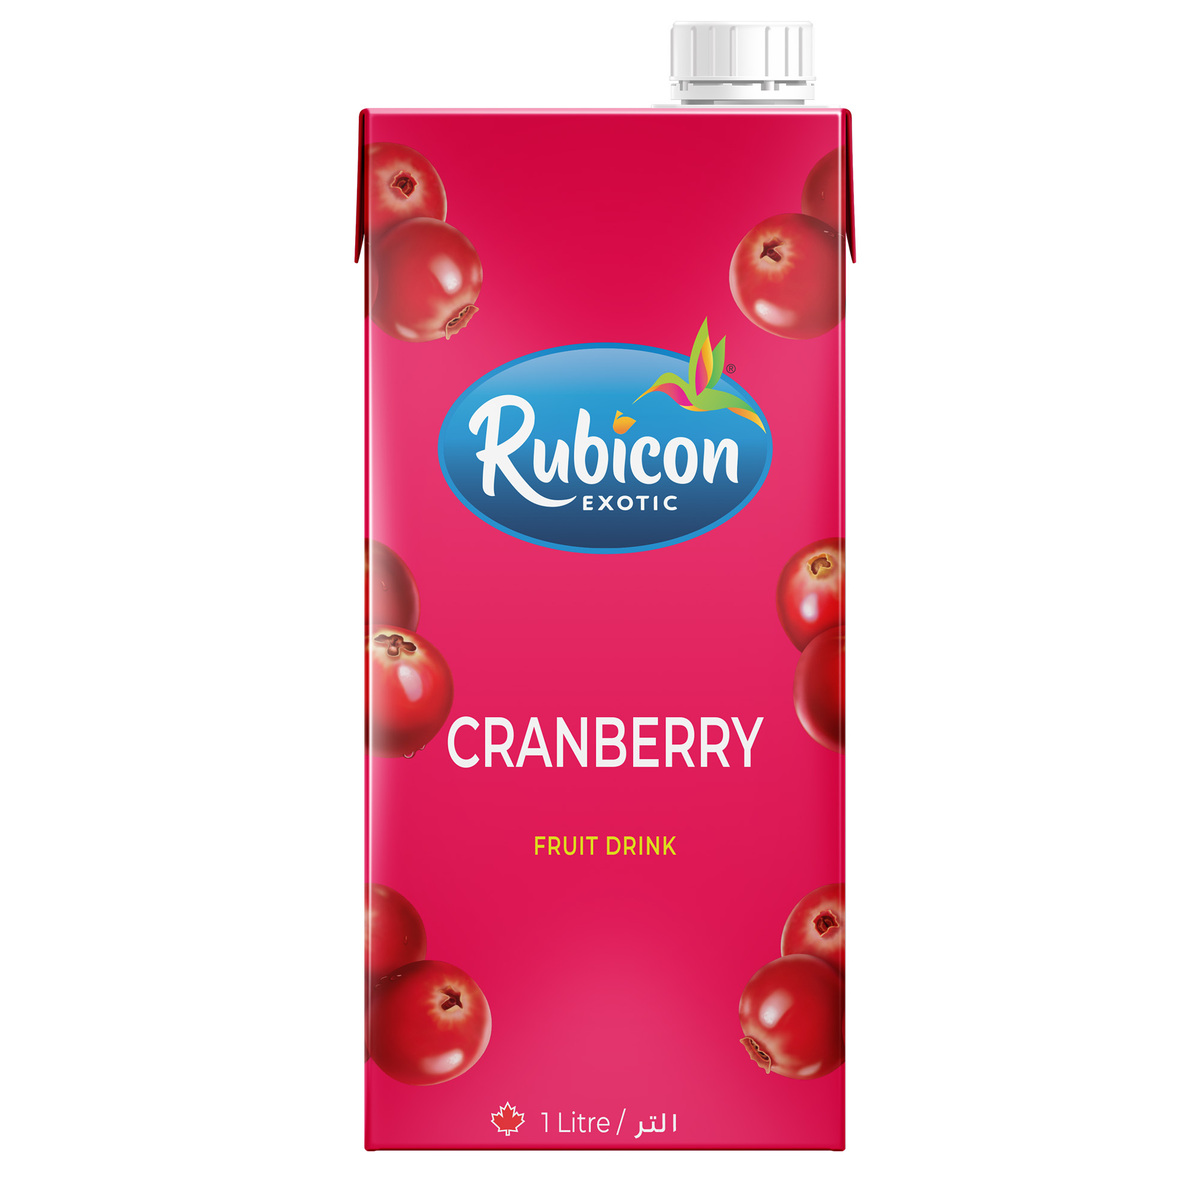 Rubicon Exotic Cranberry Fruit Drink 1 Litre